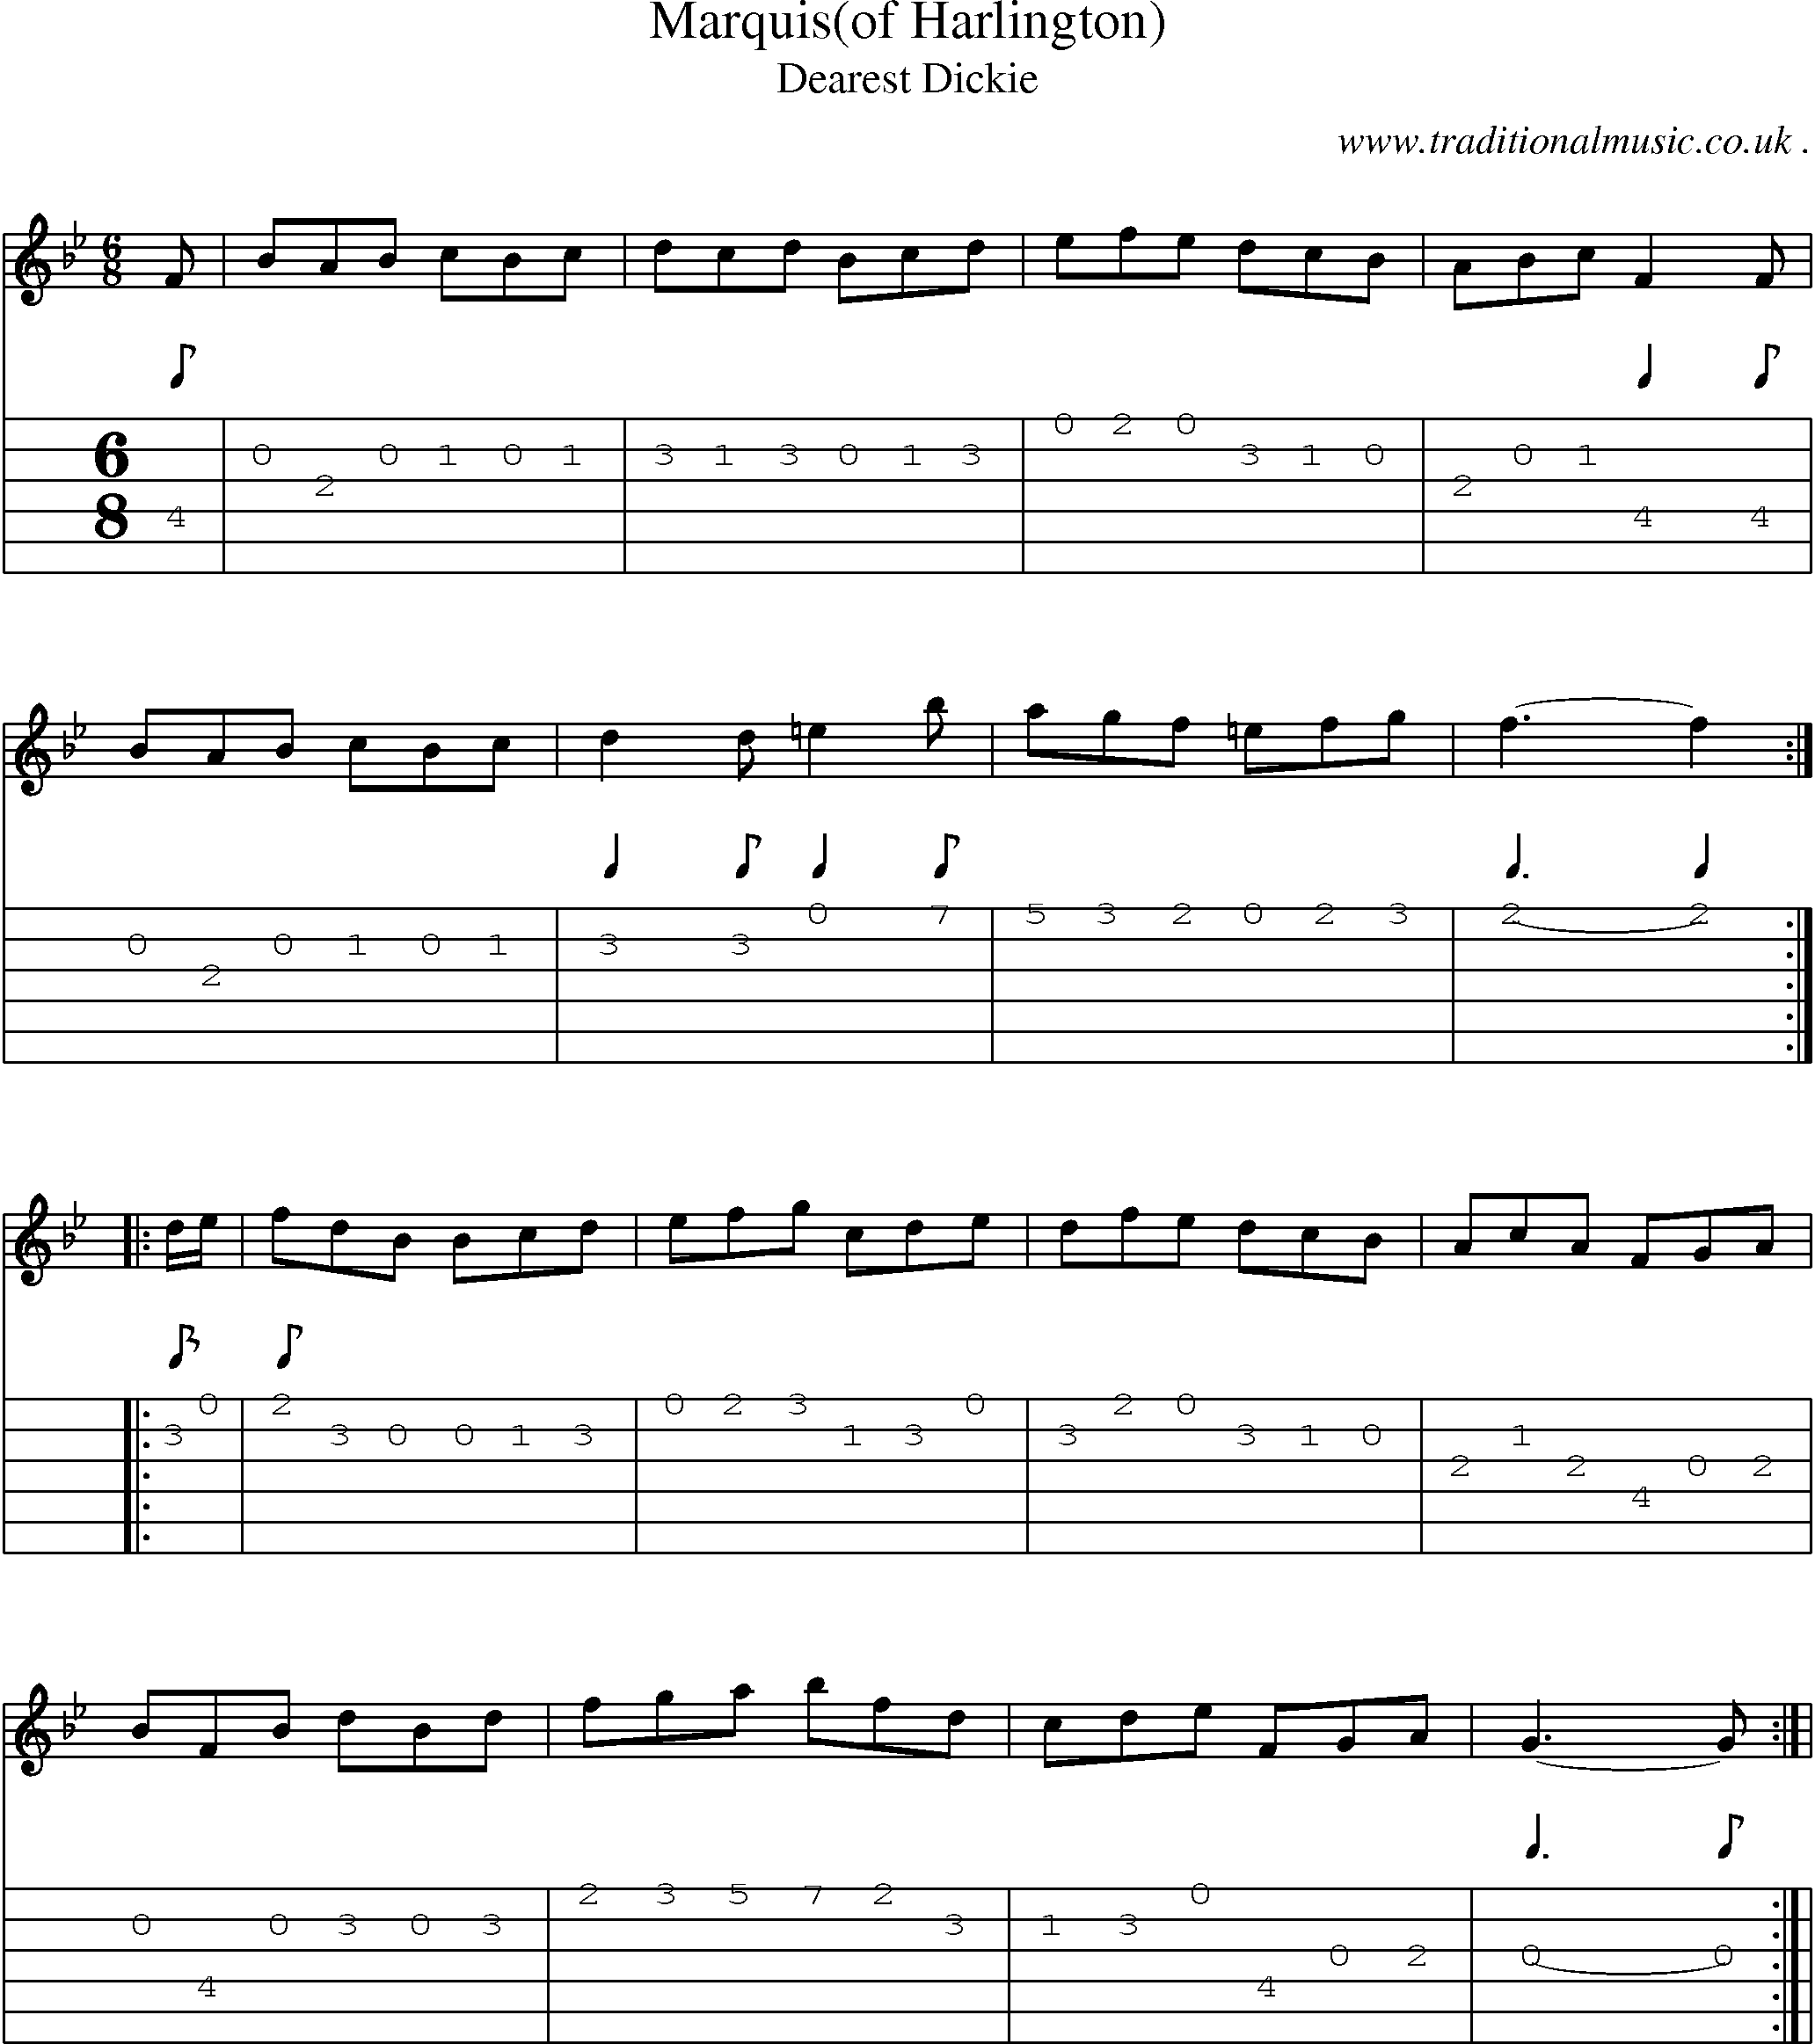 Sheet-Music and Guitar Tabs for Marquis(of Harlington)